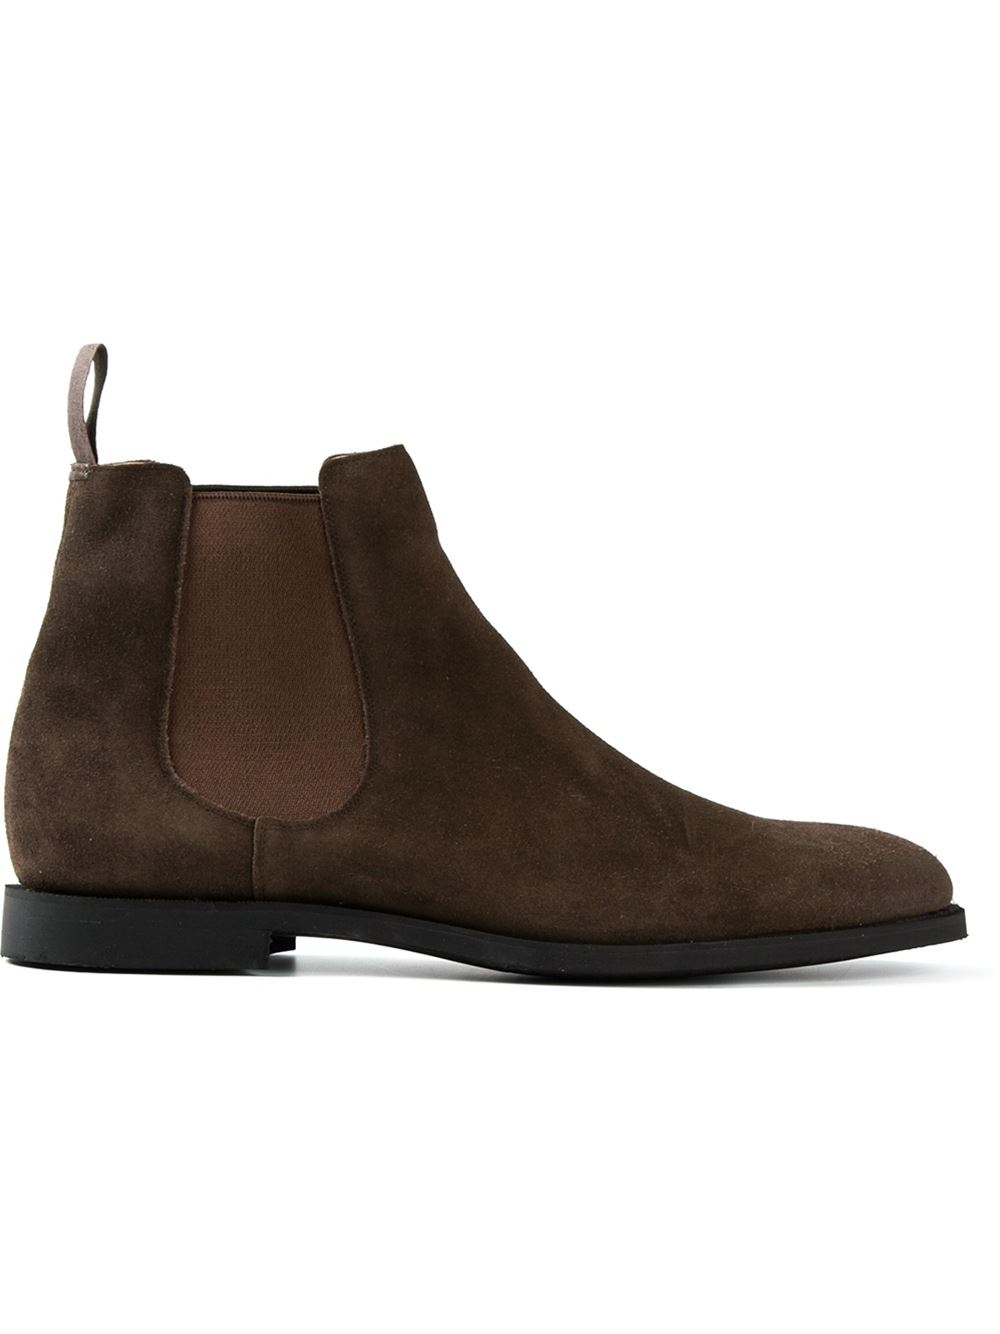 Lyst - Church's Ely Chelsea Boots in Brown for Men